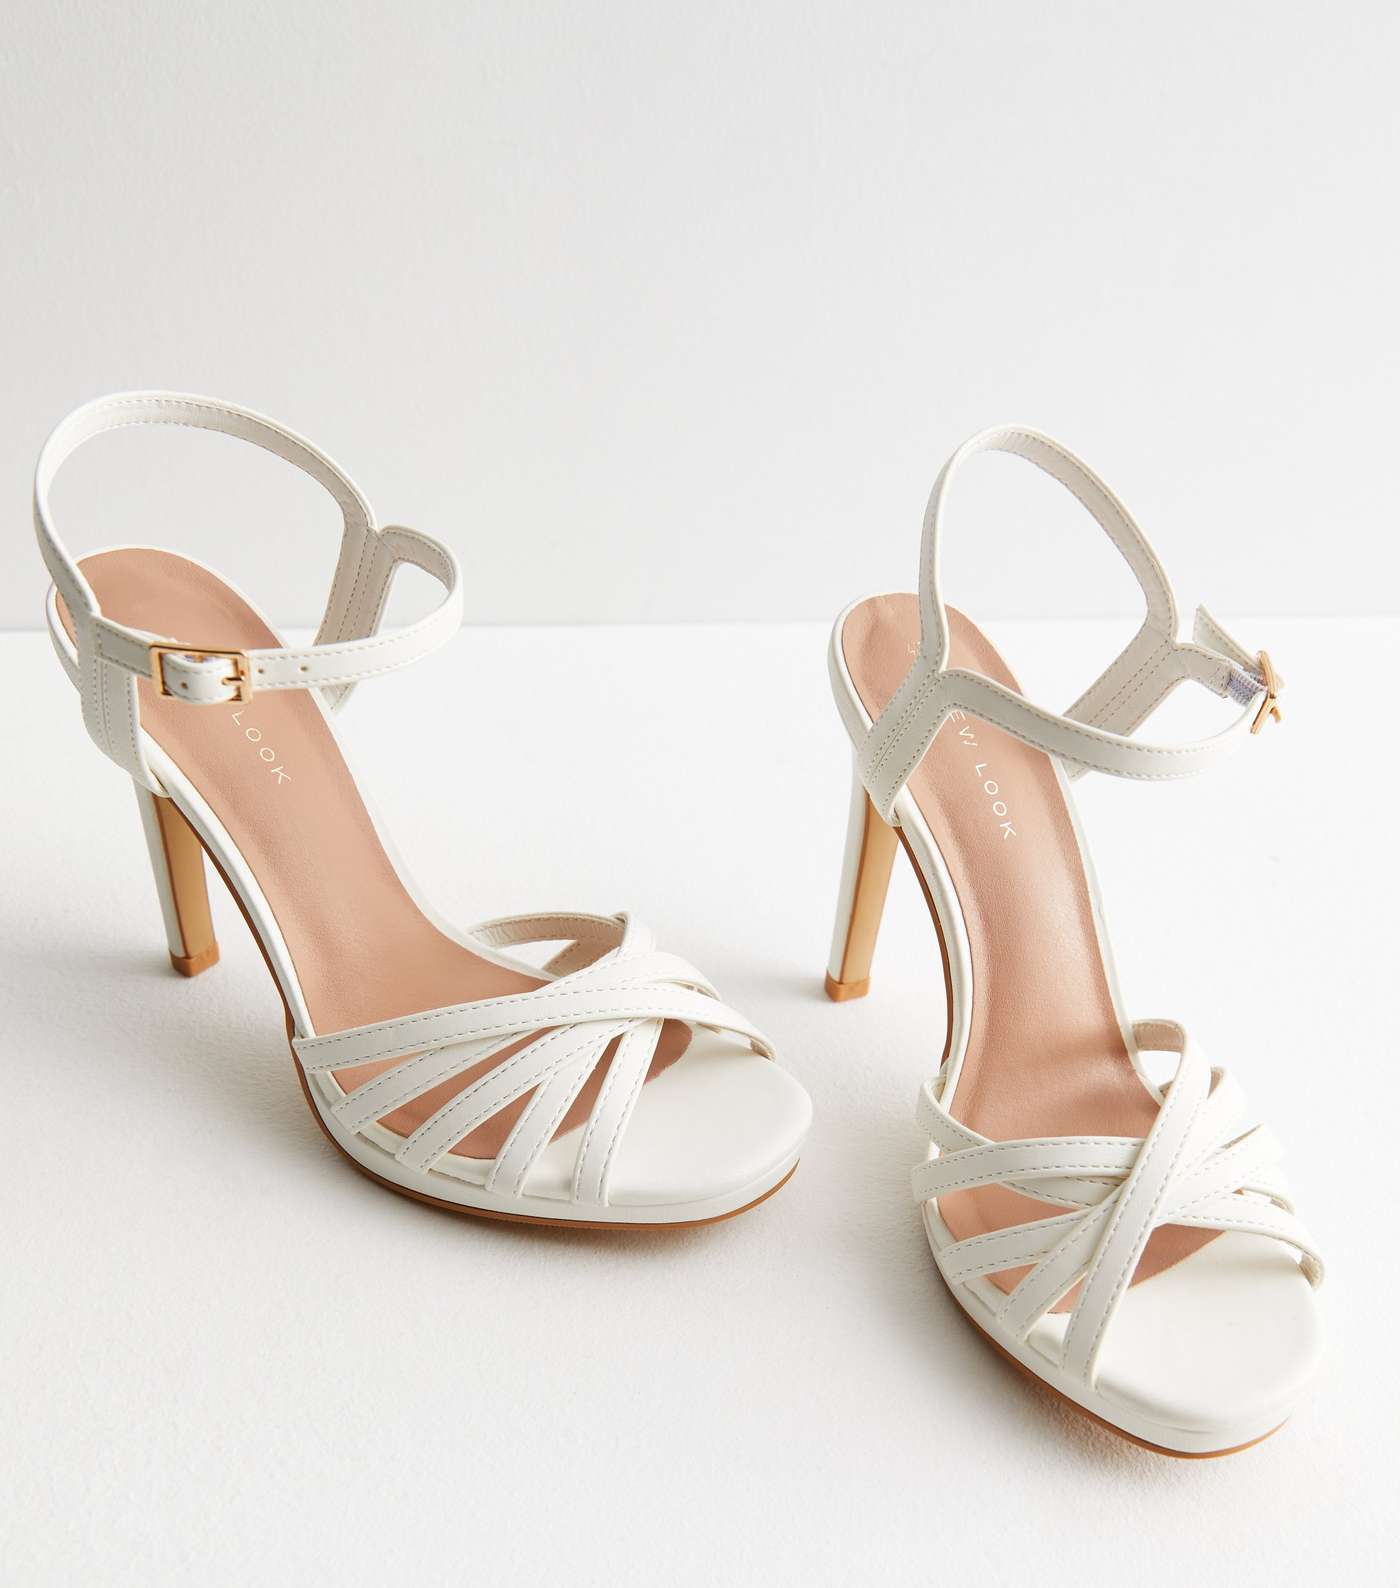 White Leather-Look 2 Part Strappy Stiletto Heel Sandals Image 3